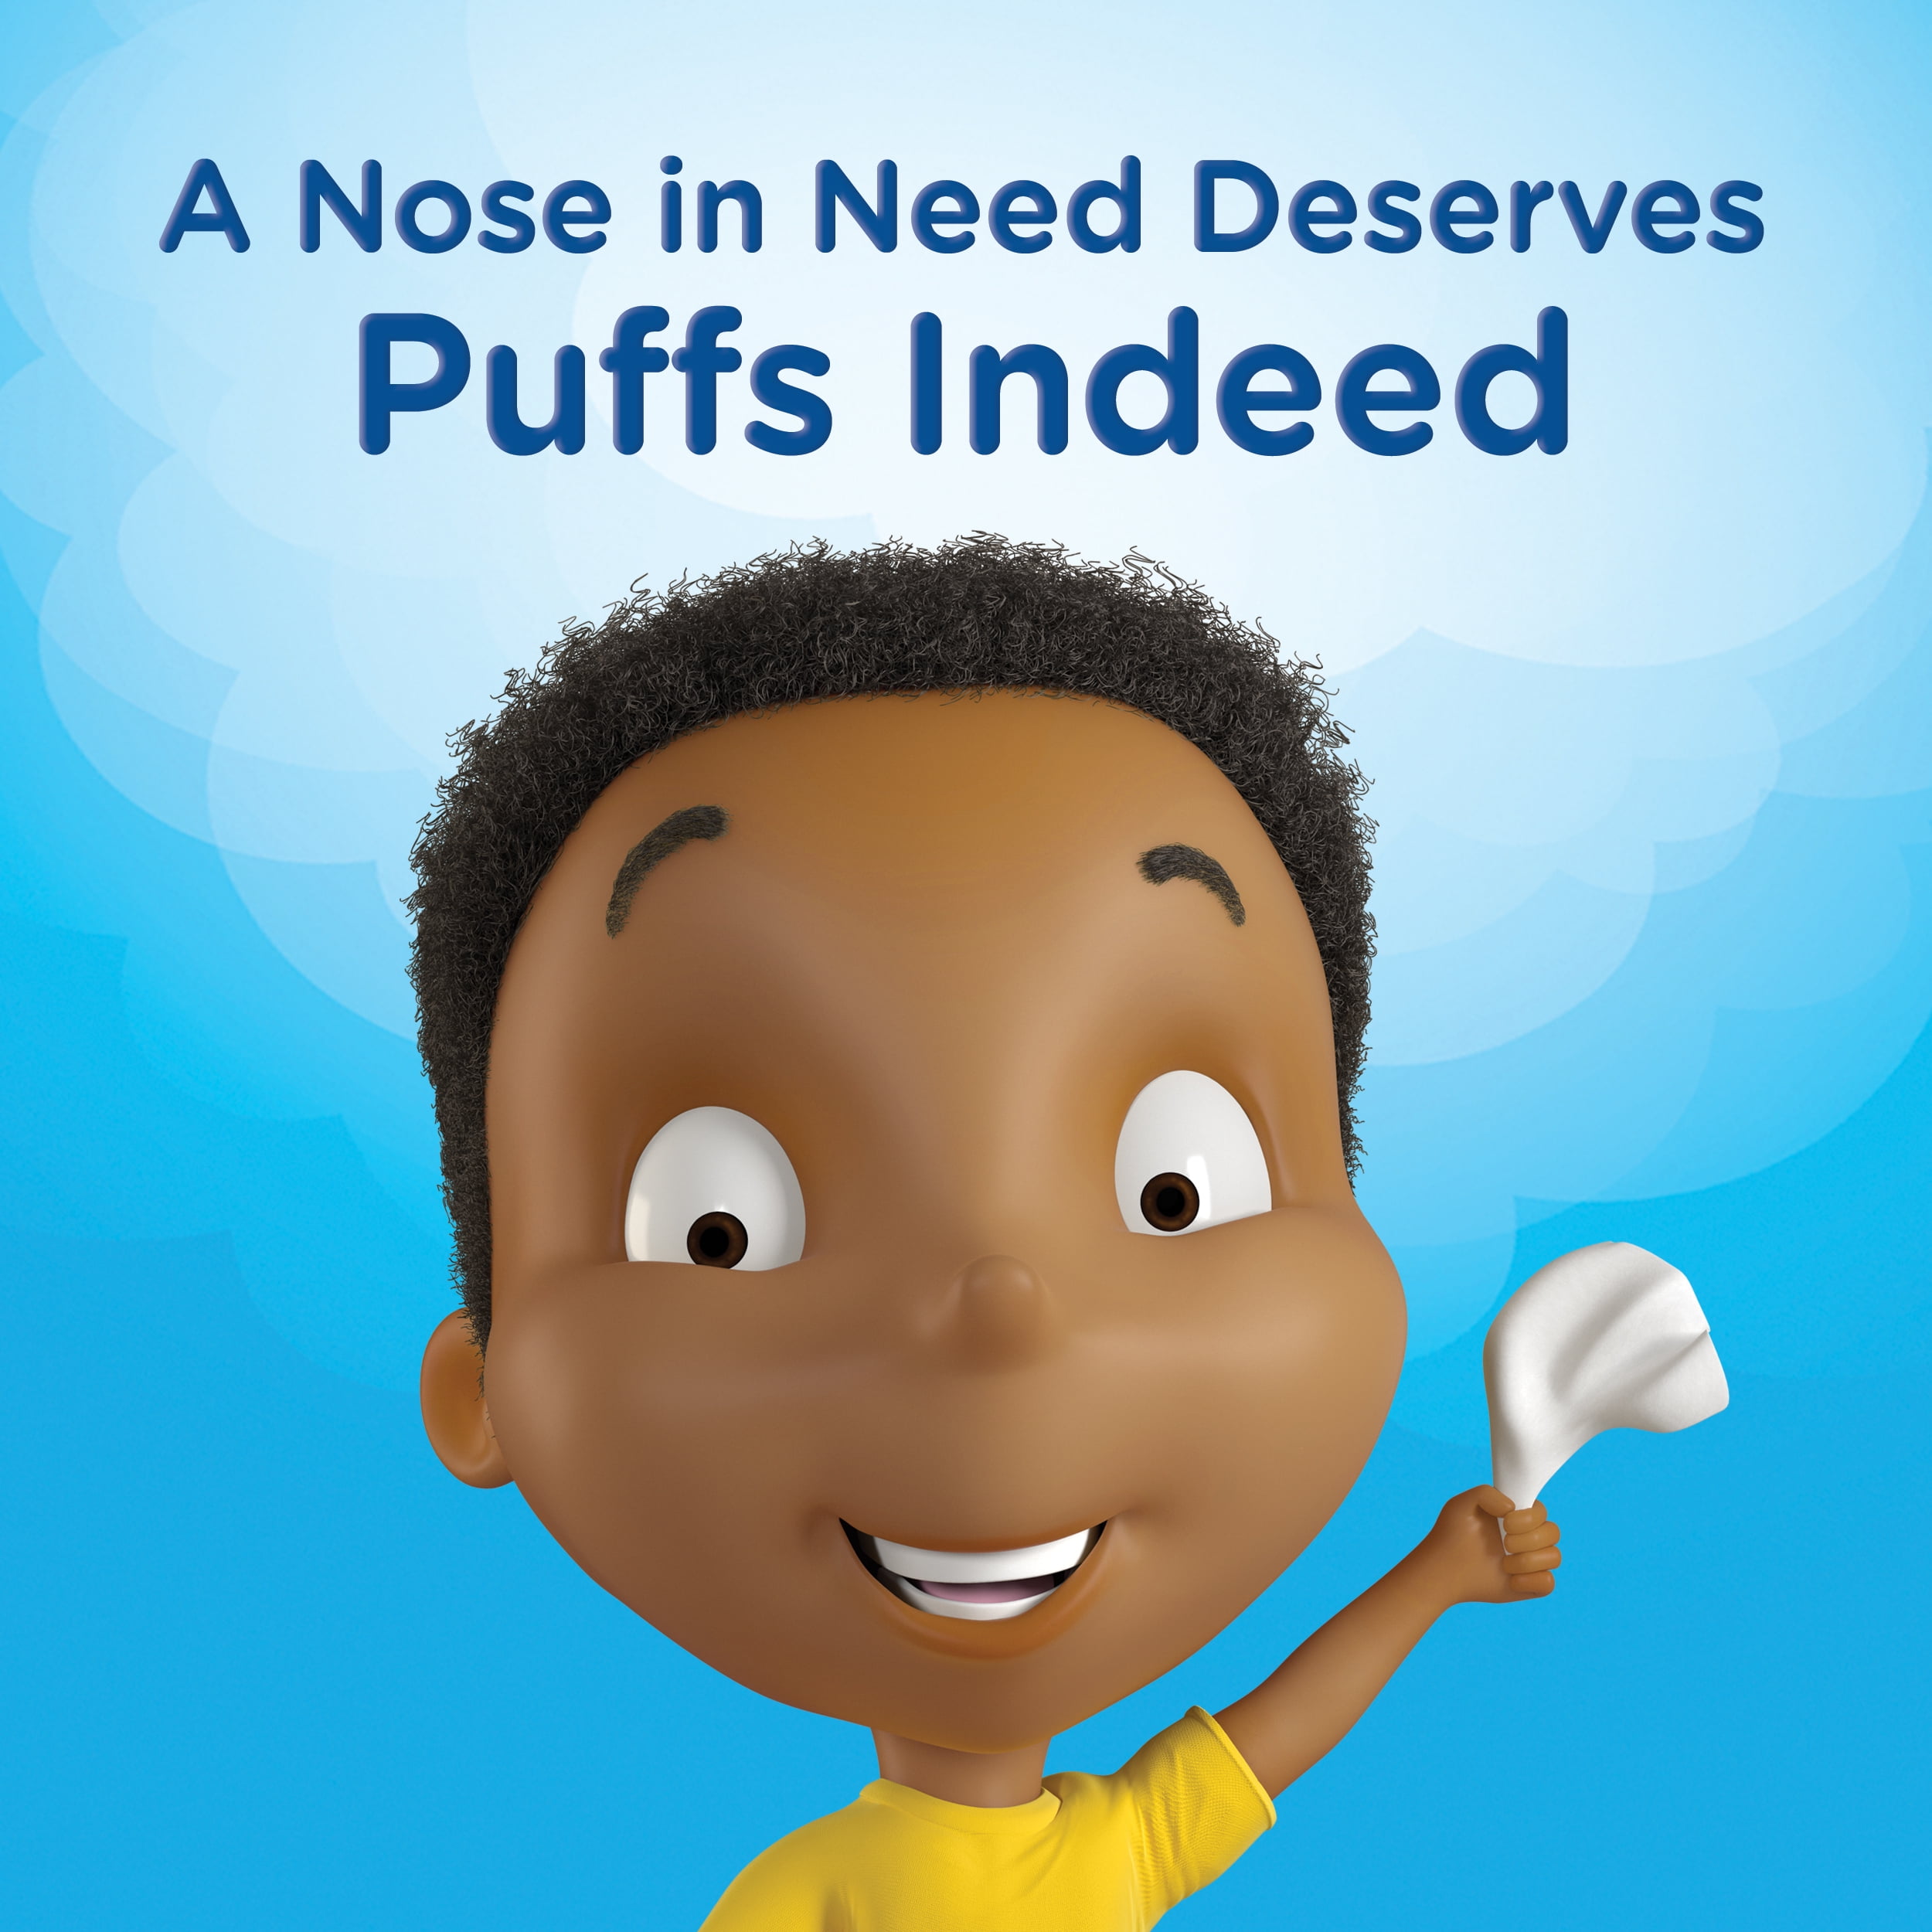 Puffs Plus Lotion 992-Count Facial Tissues as low as $8.13/Pack when you  buy 3 (Reg. $18) + Free Shipping - $1.02/124-Count Box or 1¢/Tissue -  Fabulessly Frugal